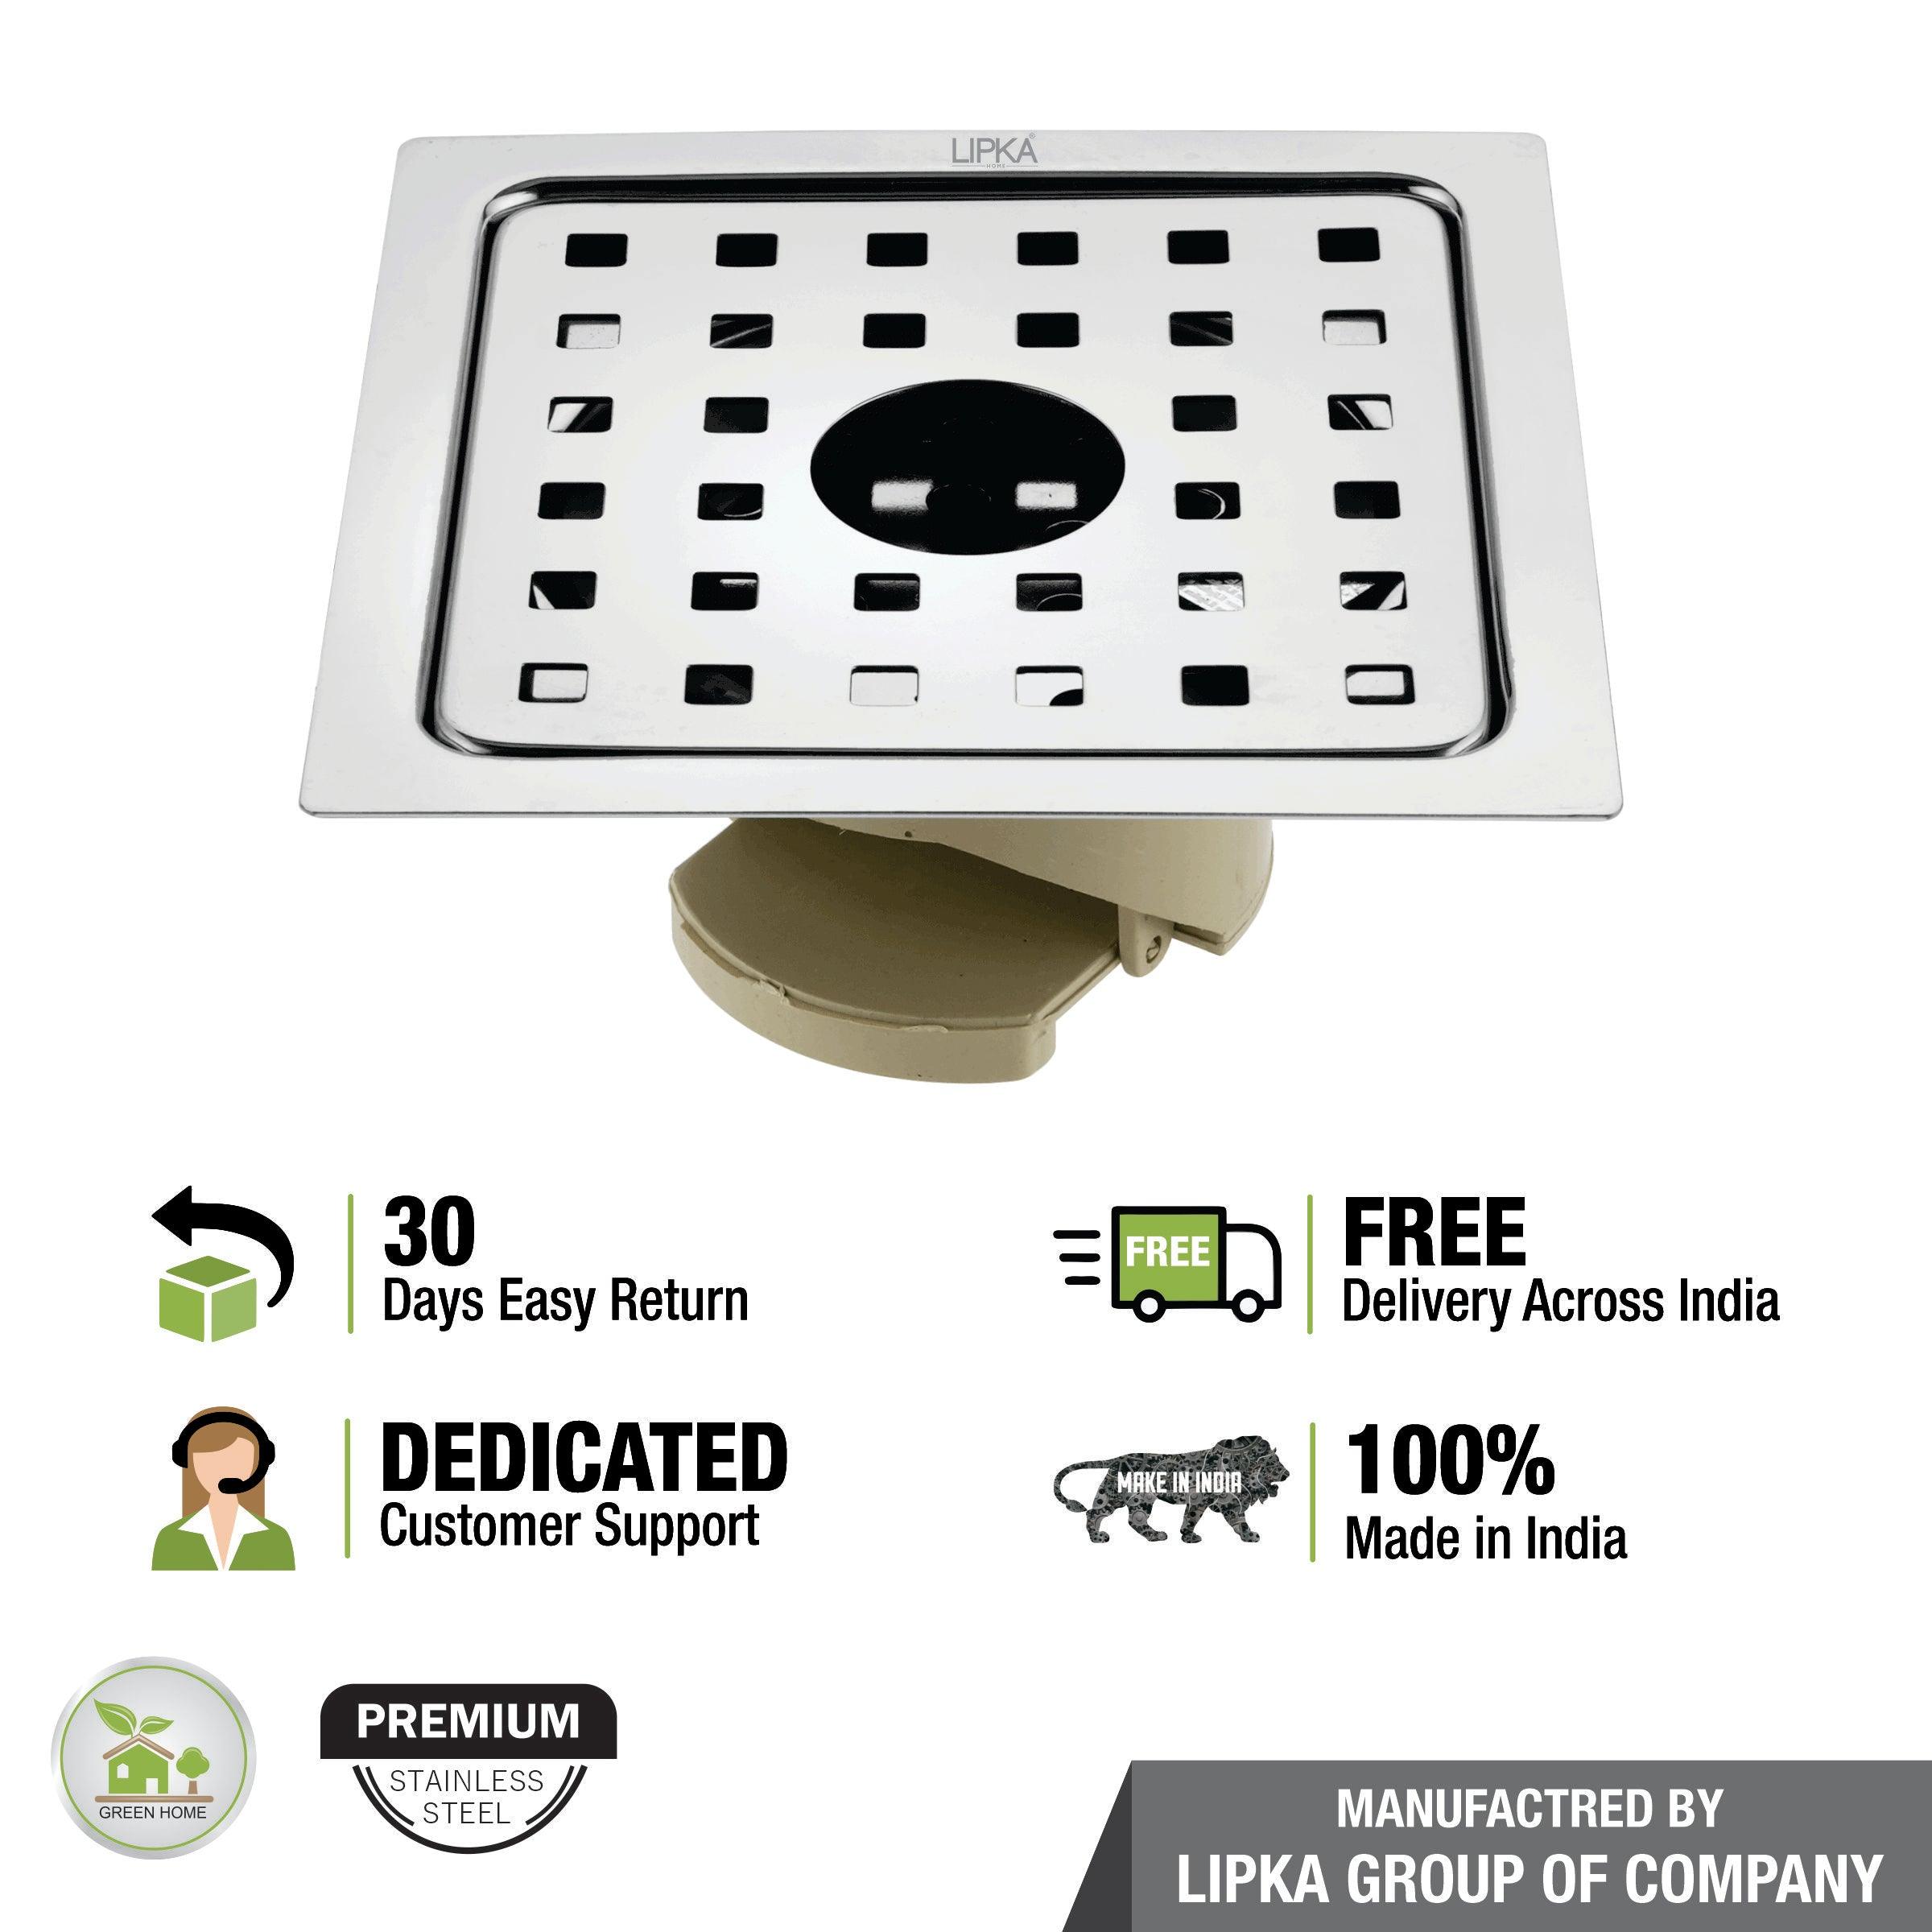 Square Jal Floor Drain (5 x 5 Inches) with Hole and Wide PVC Cockroach Trap - LIPKA - Lipka Home